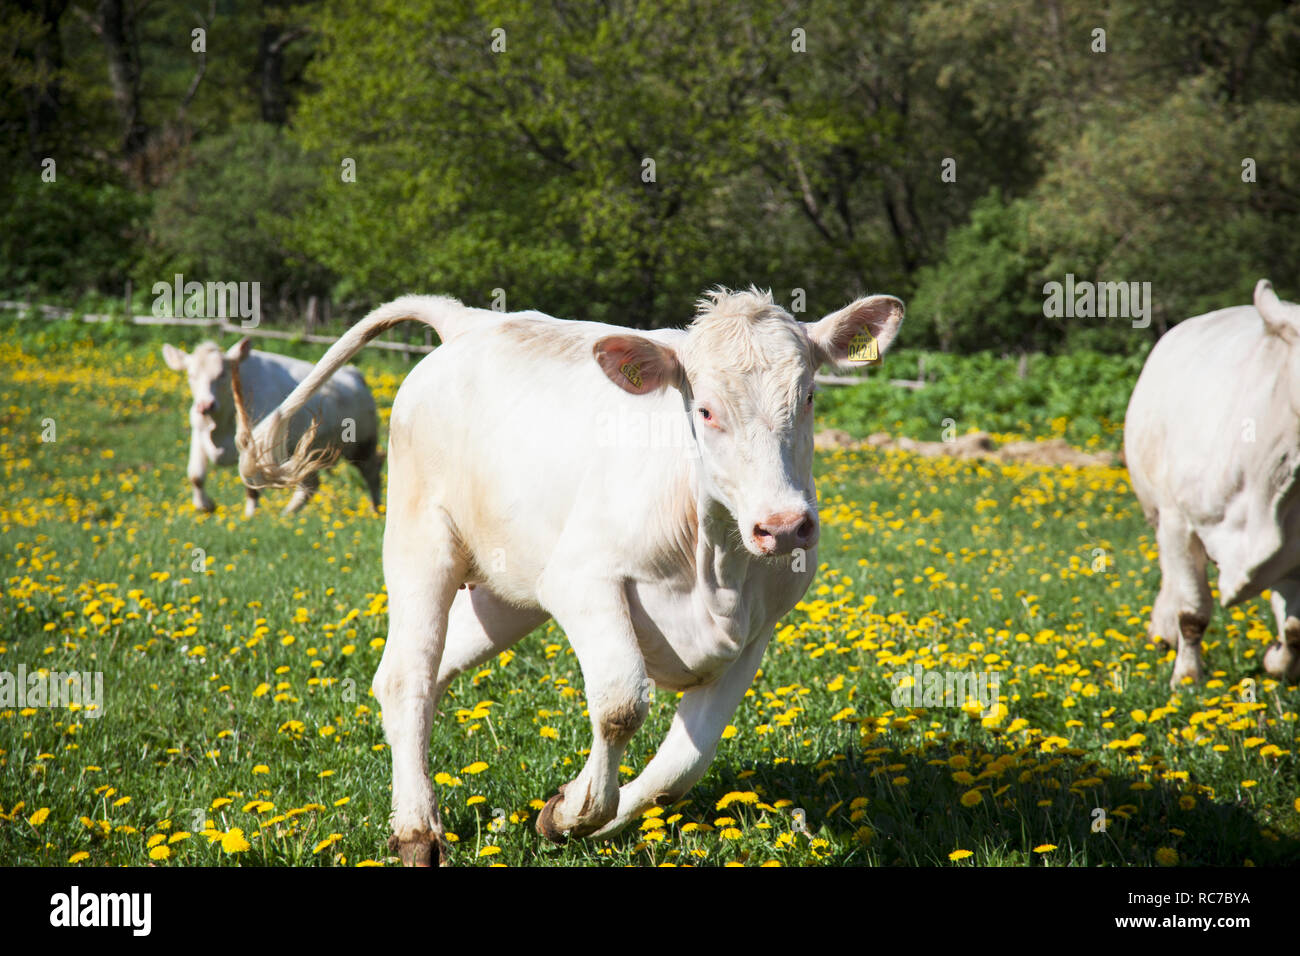 Cows running on meadow Stock Photo